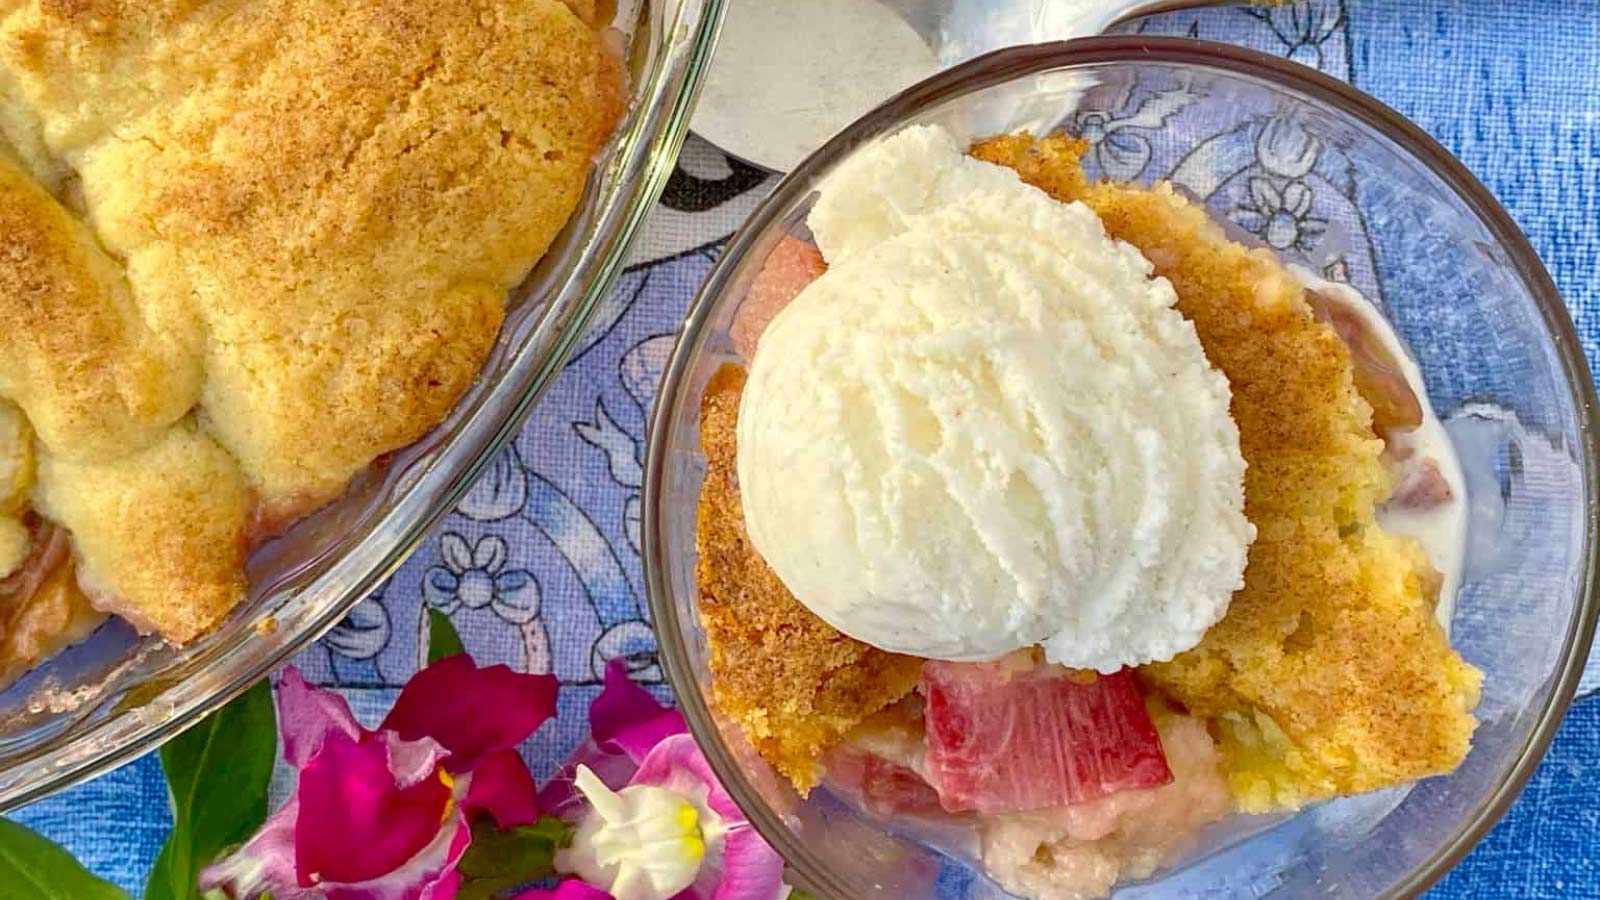 An overhead view of a glass bowl with a serving of rhubarb cobbler and a scoop of vanilla ice cream in it.